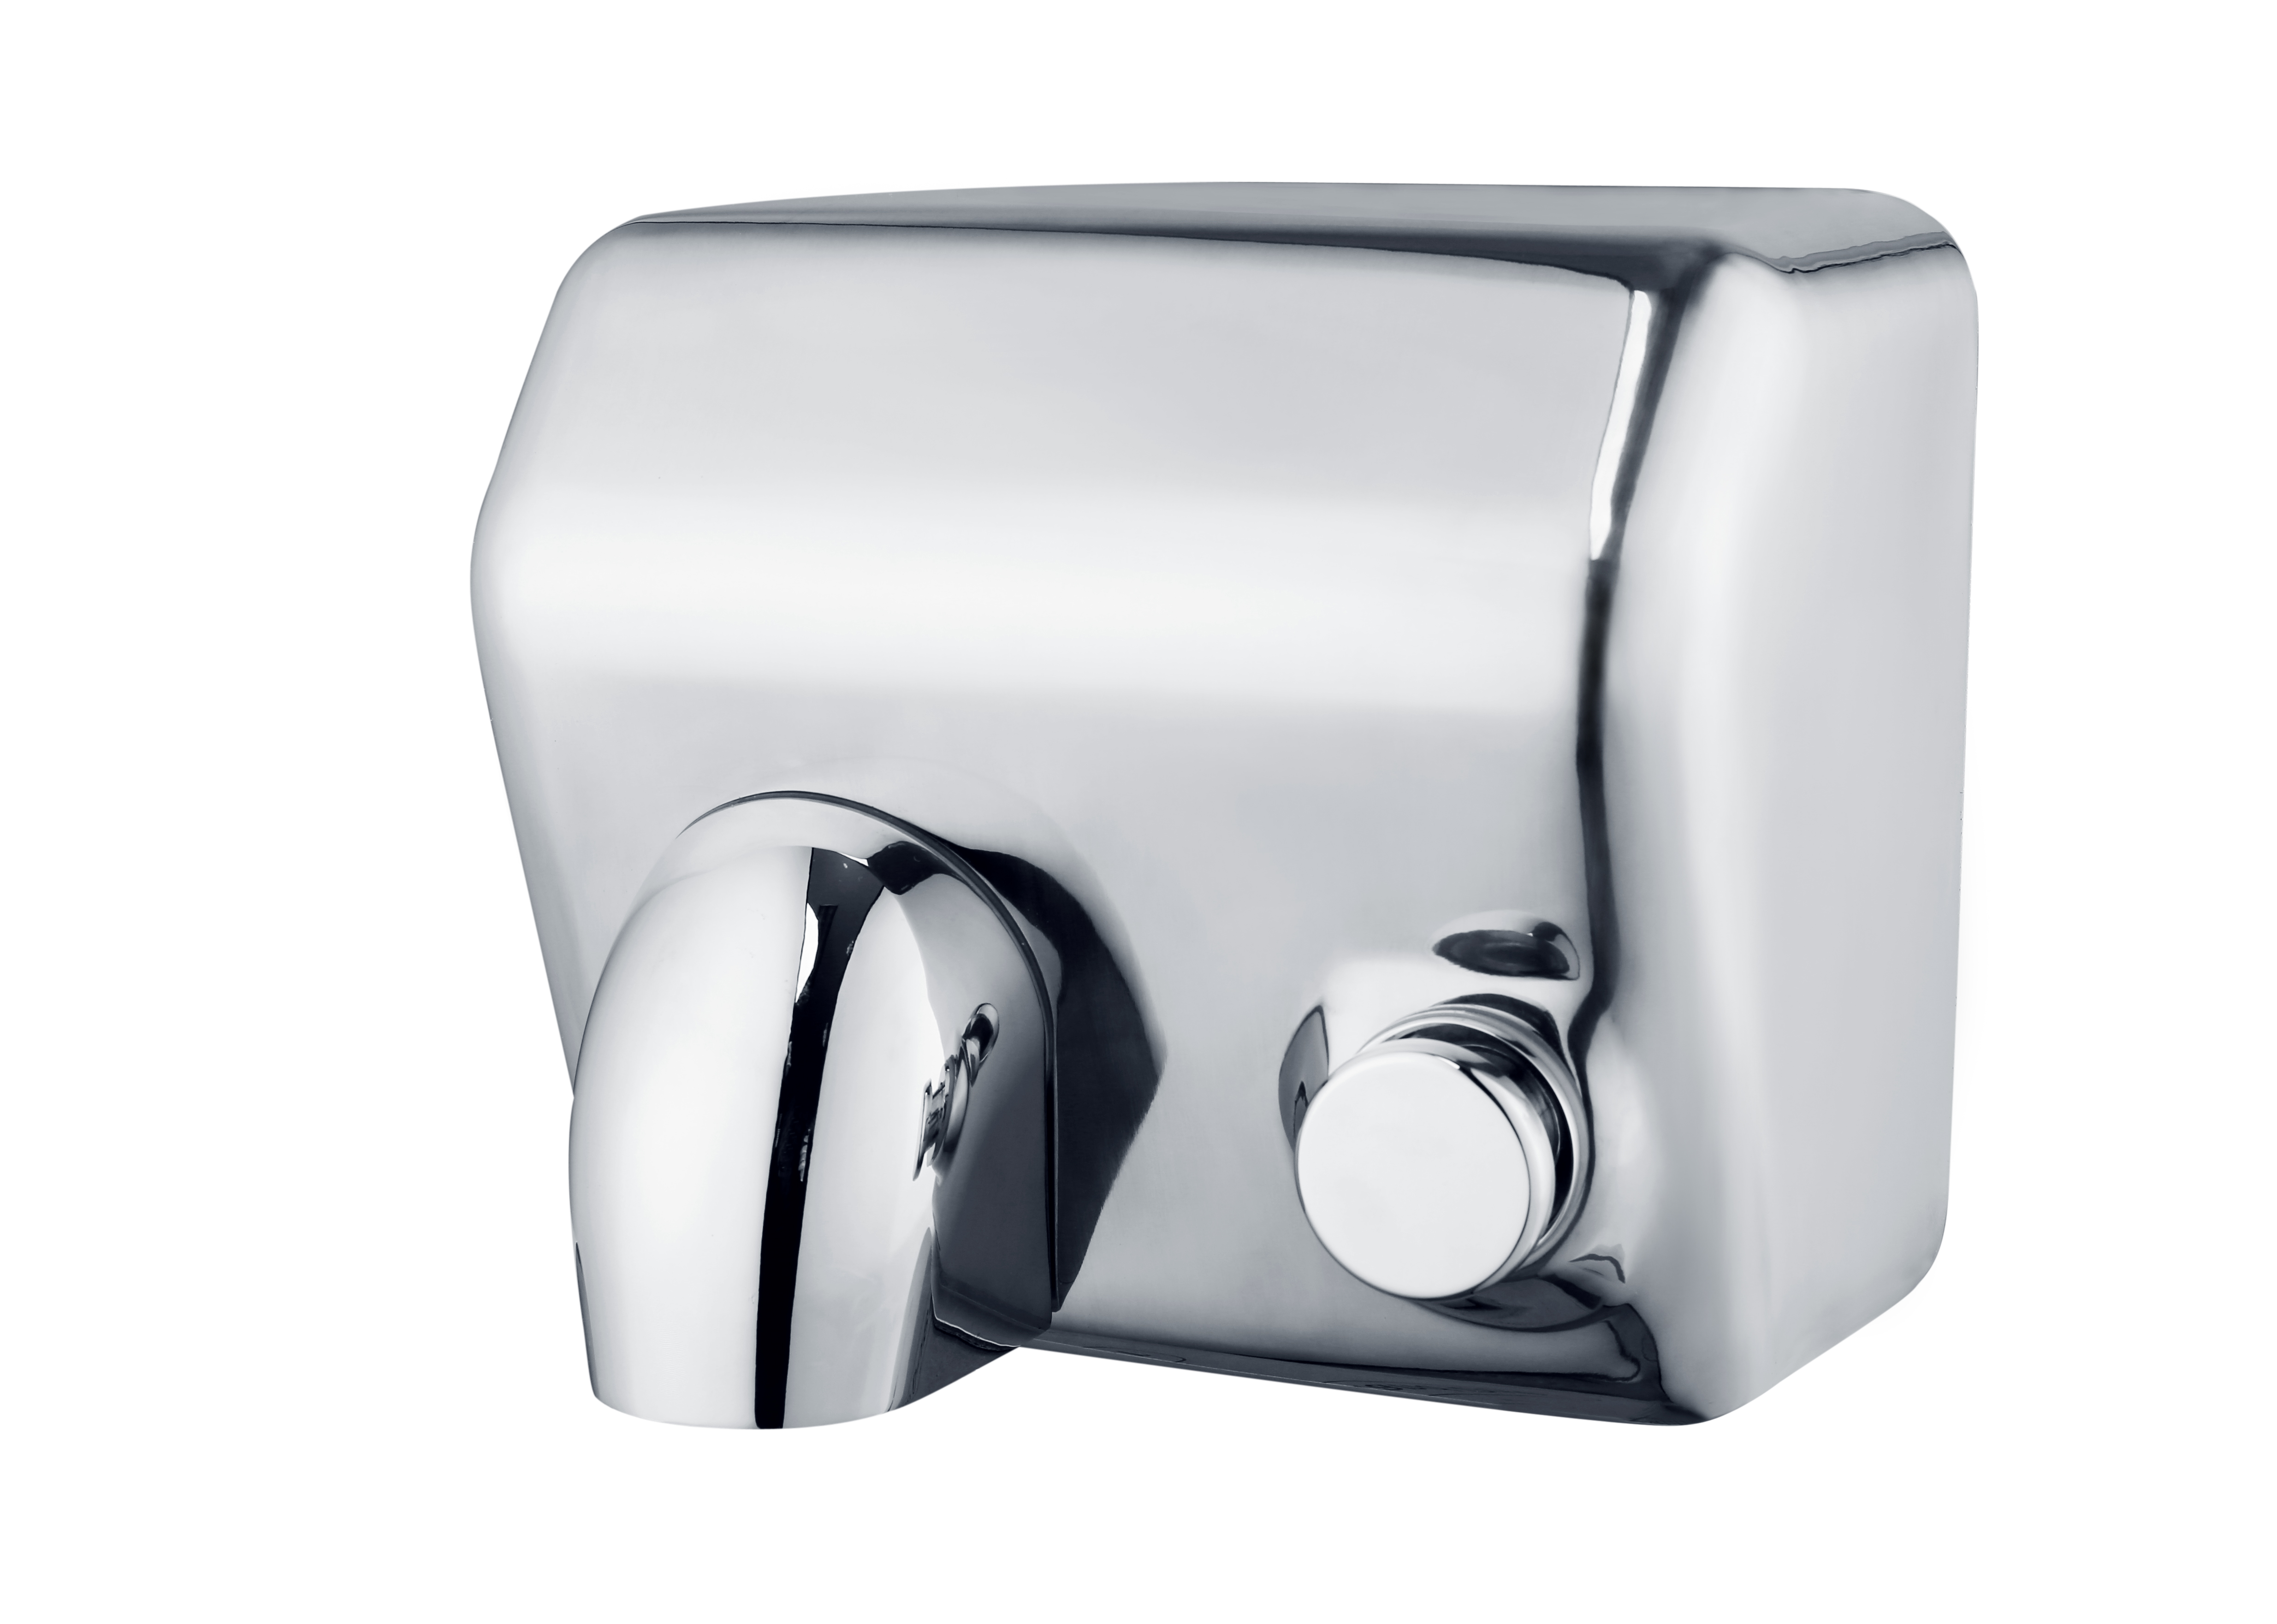 Durable Stainless Steel Automatic Hand Dryer